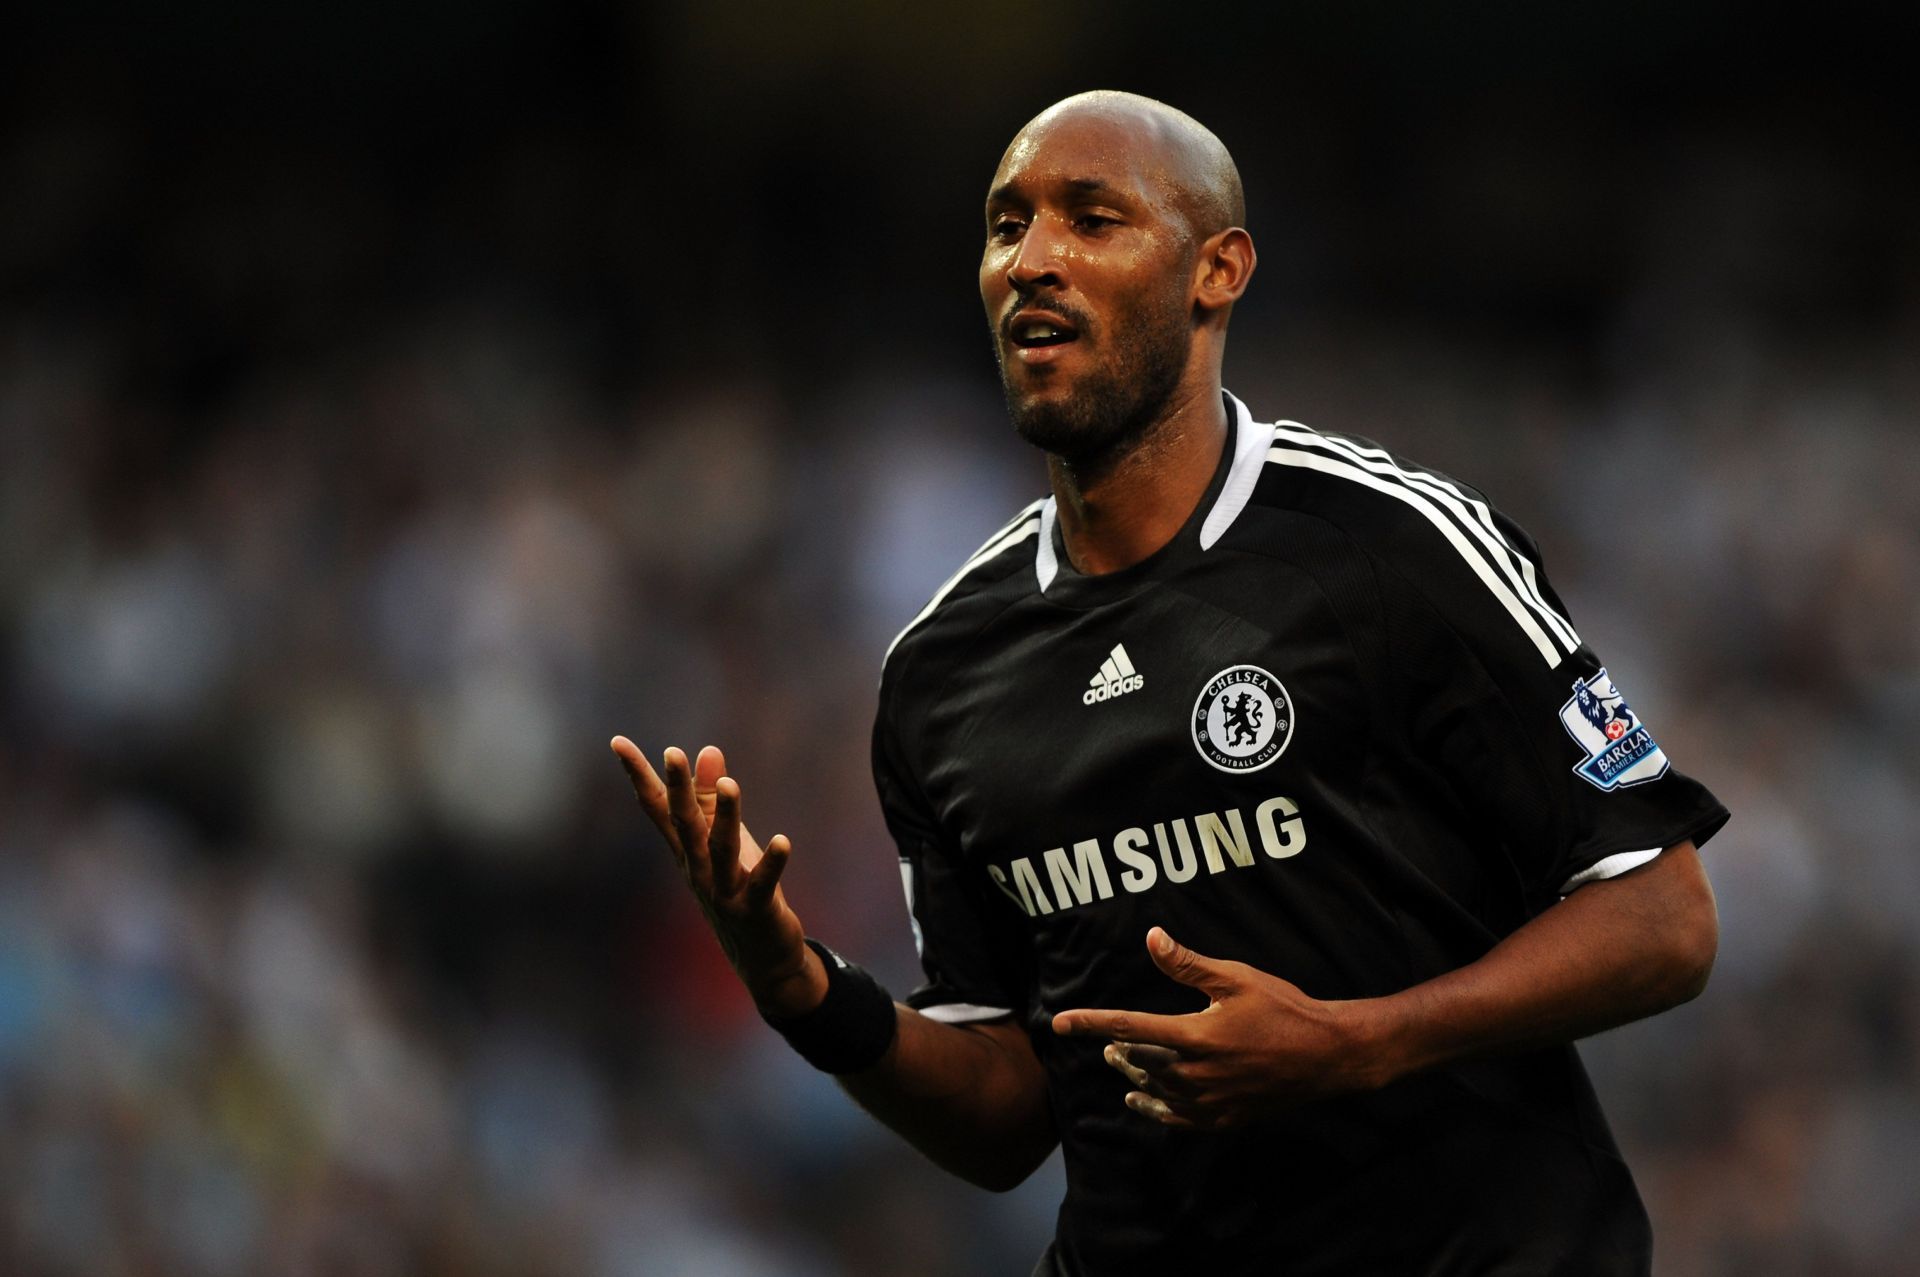 Nicolas Anelka has played for some of the biggest clubs across Europe